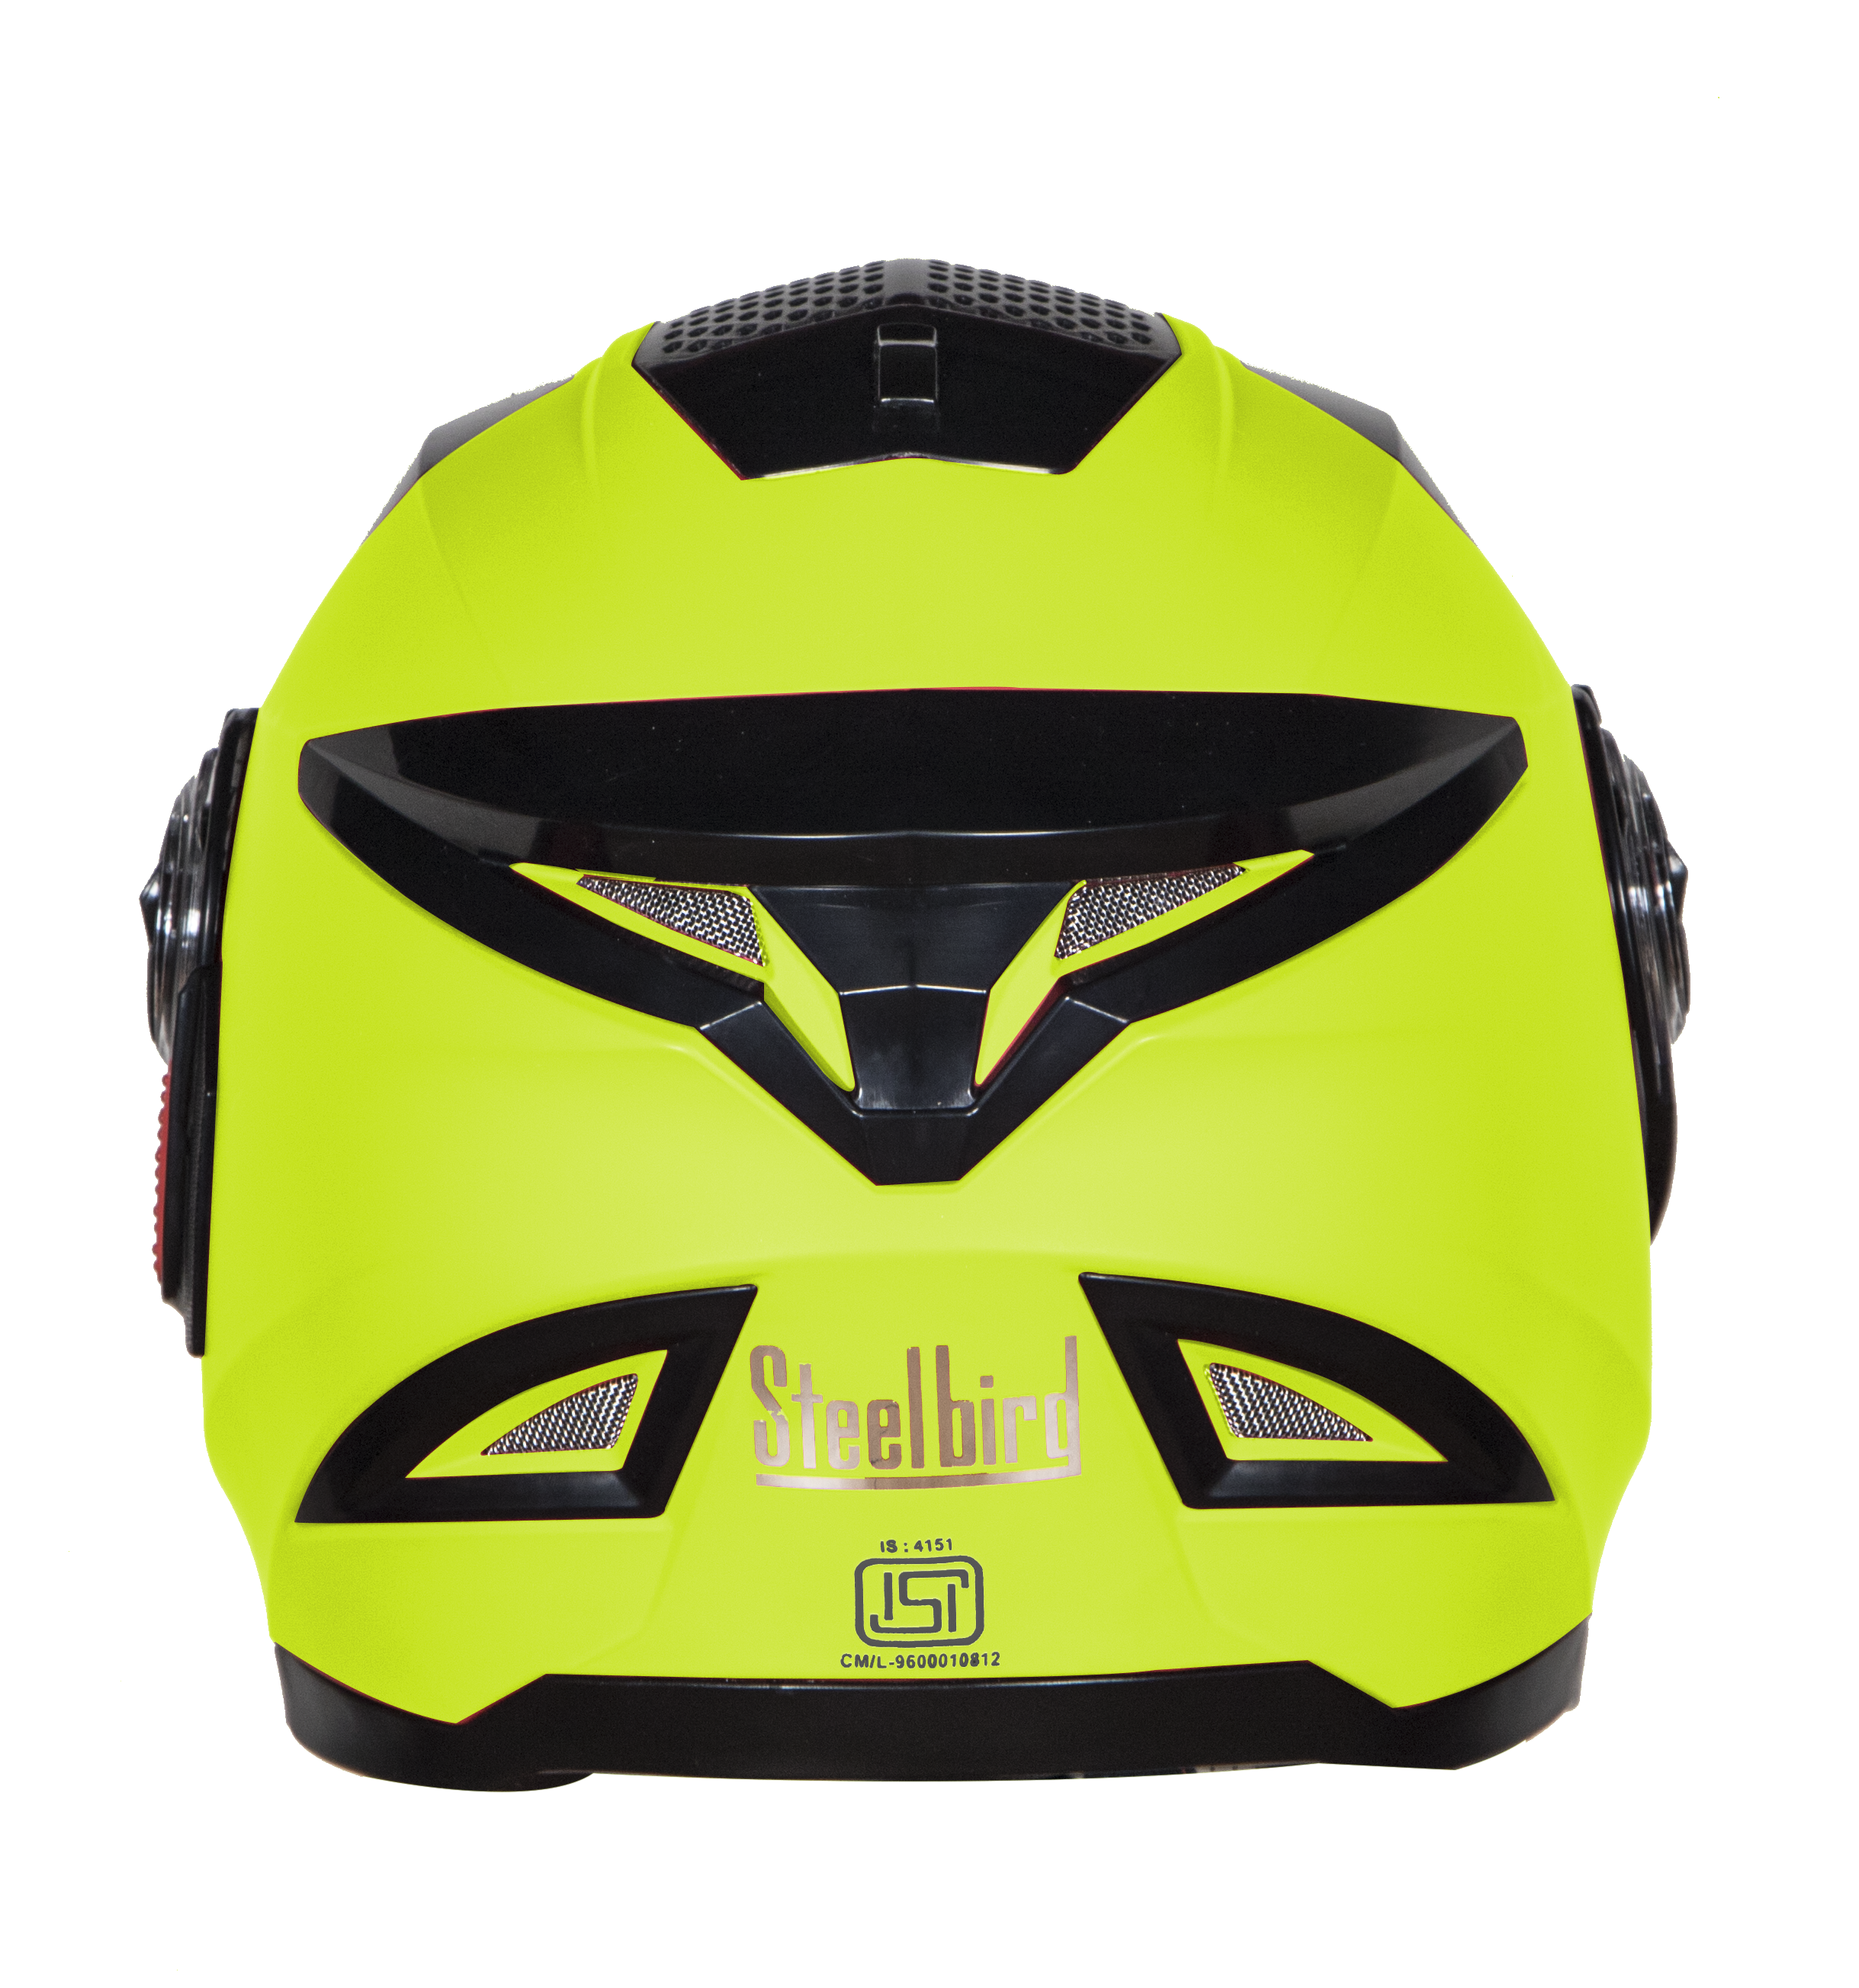 SBH-17 OPT GLOSSY FLUO NEON (WITH EXTRA FREE CABLE LOCK)